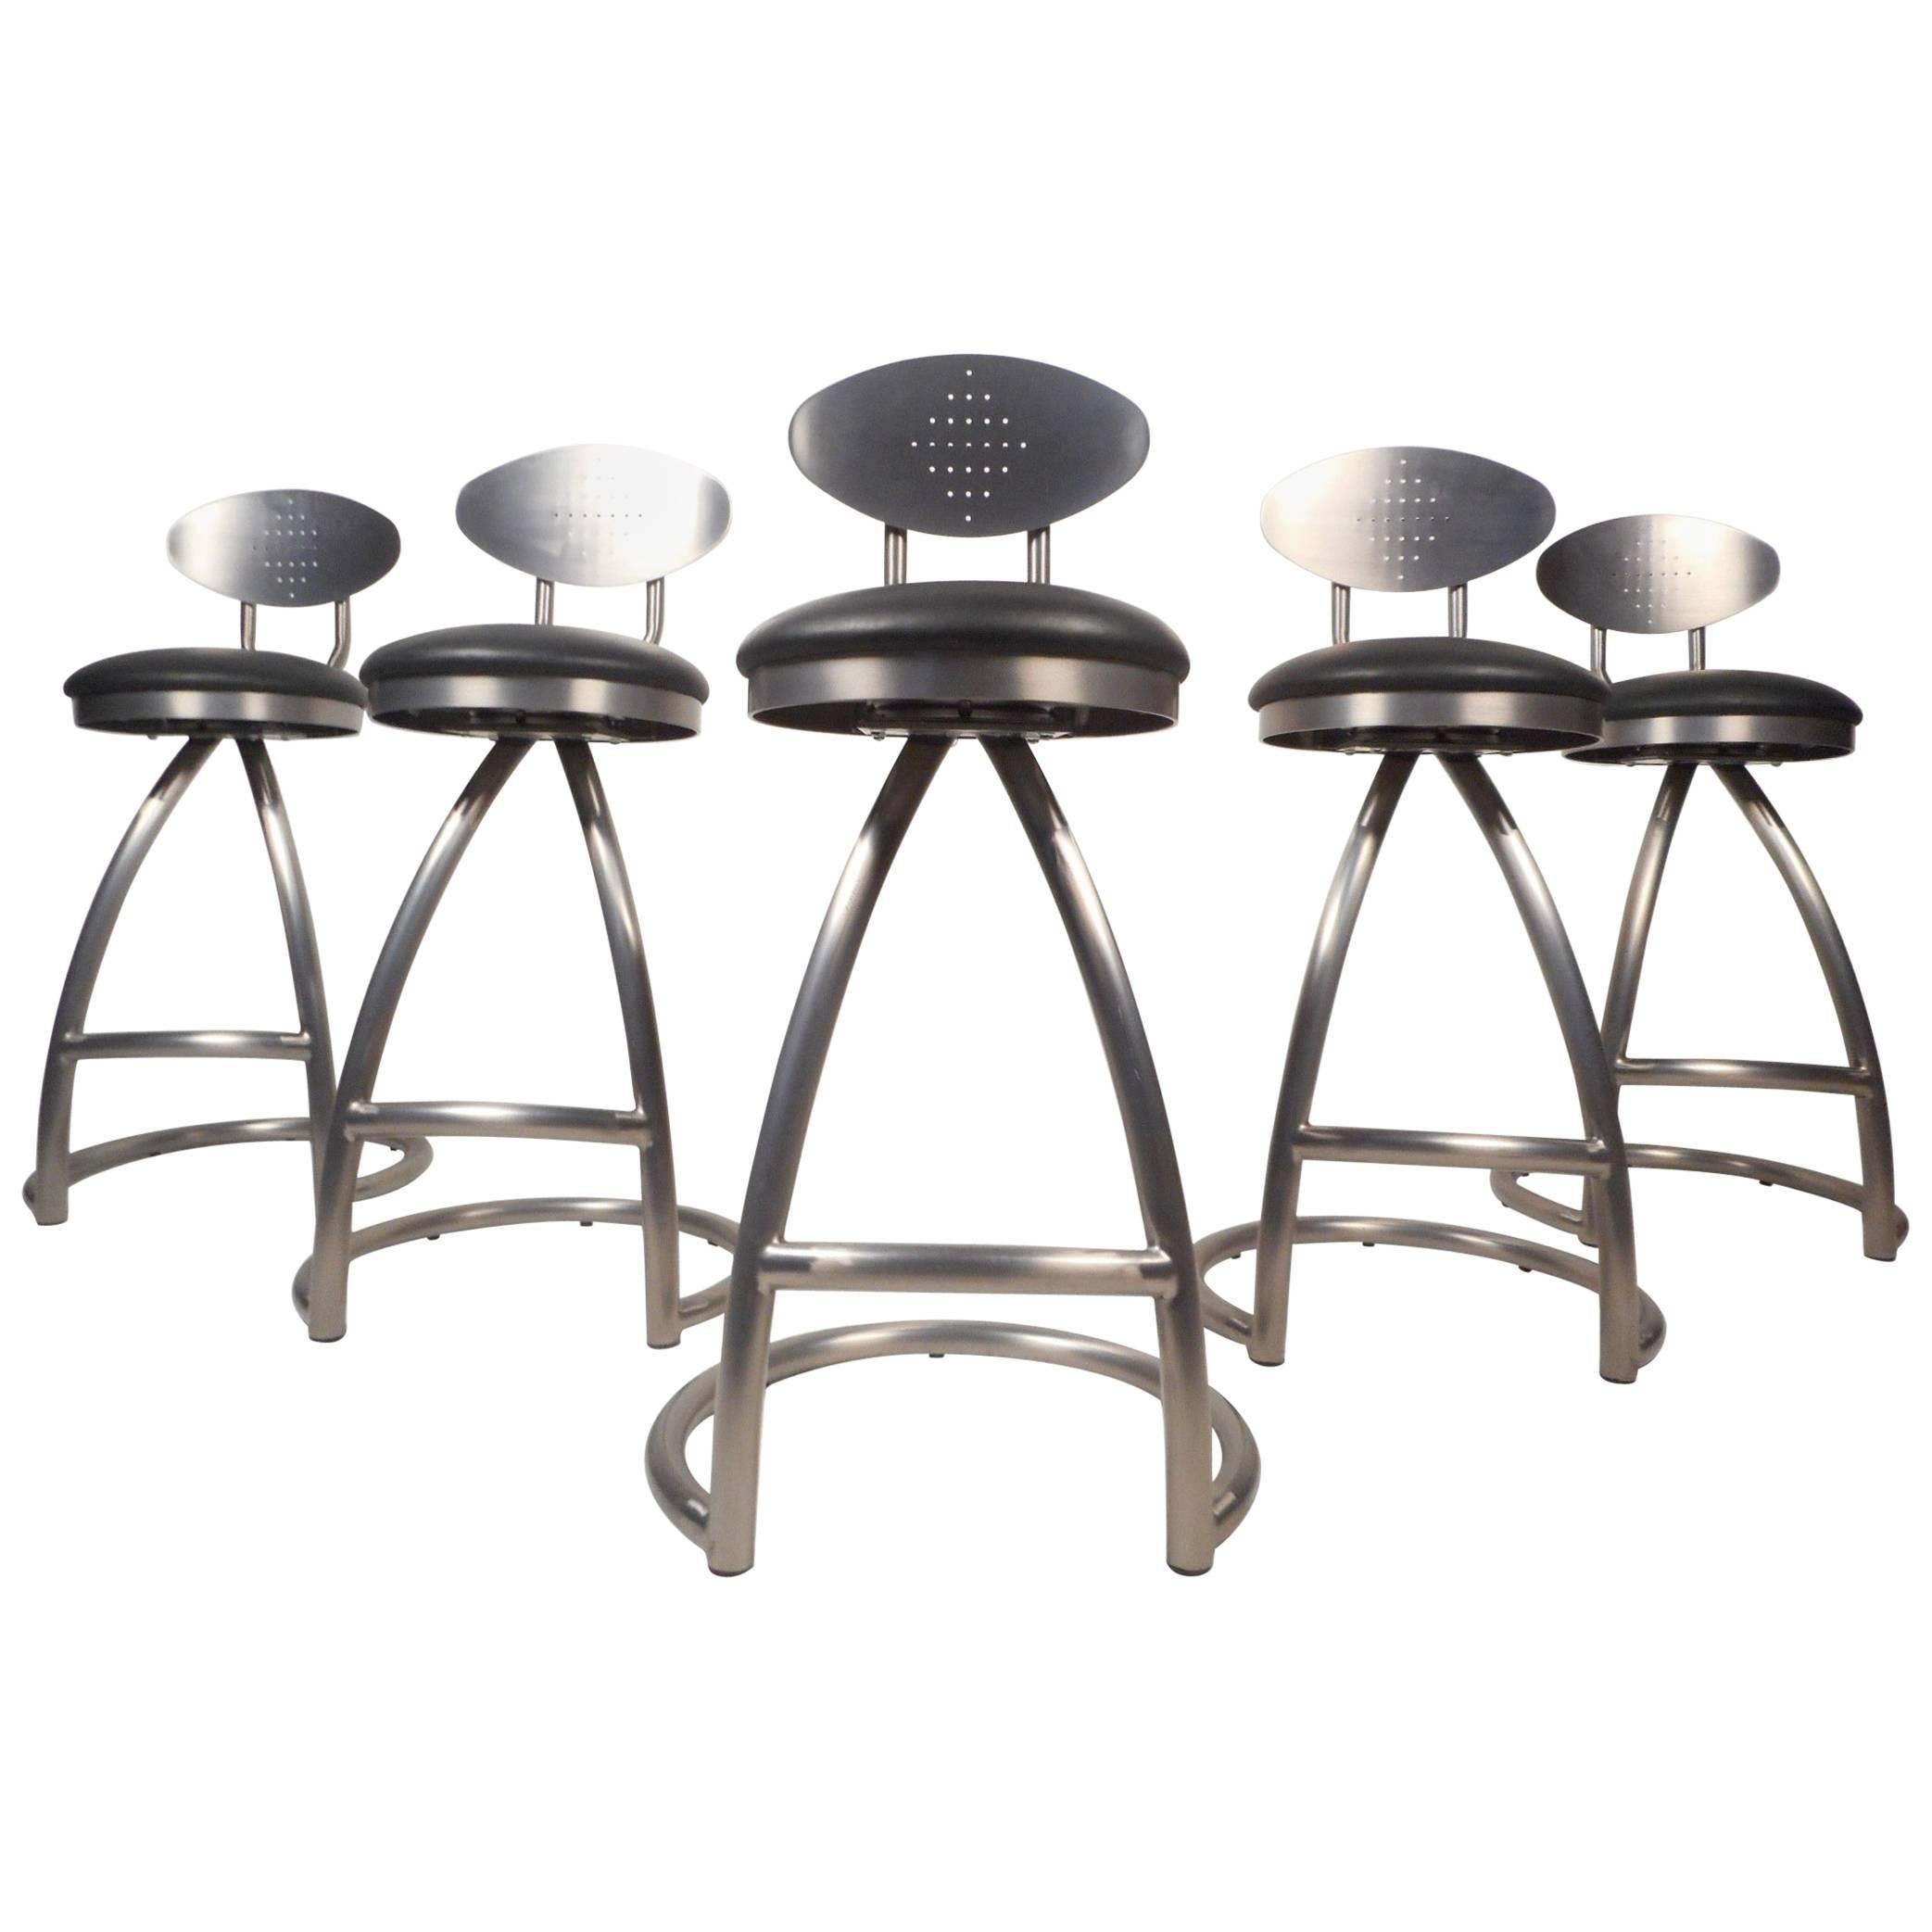 Set of Five Contemporary Modern Industrial Style Bar Stools